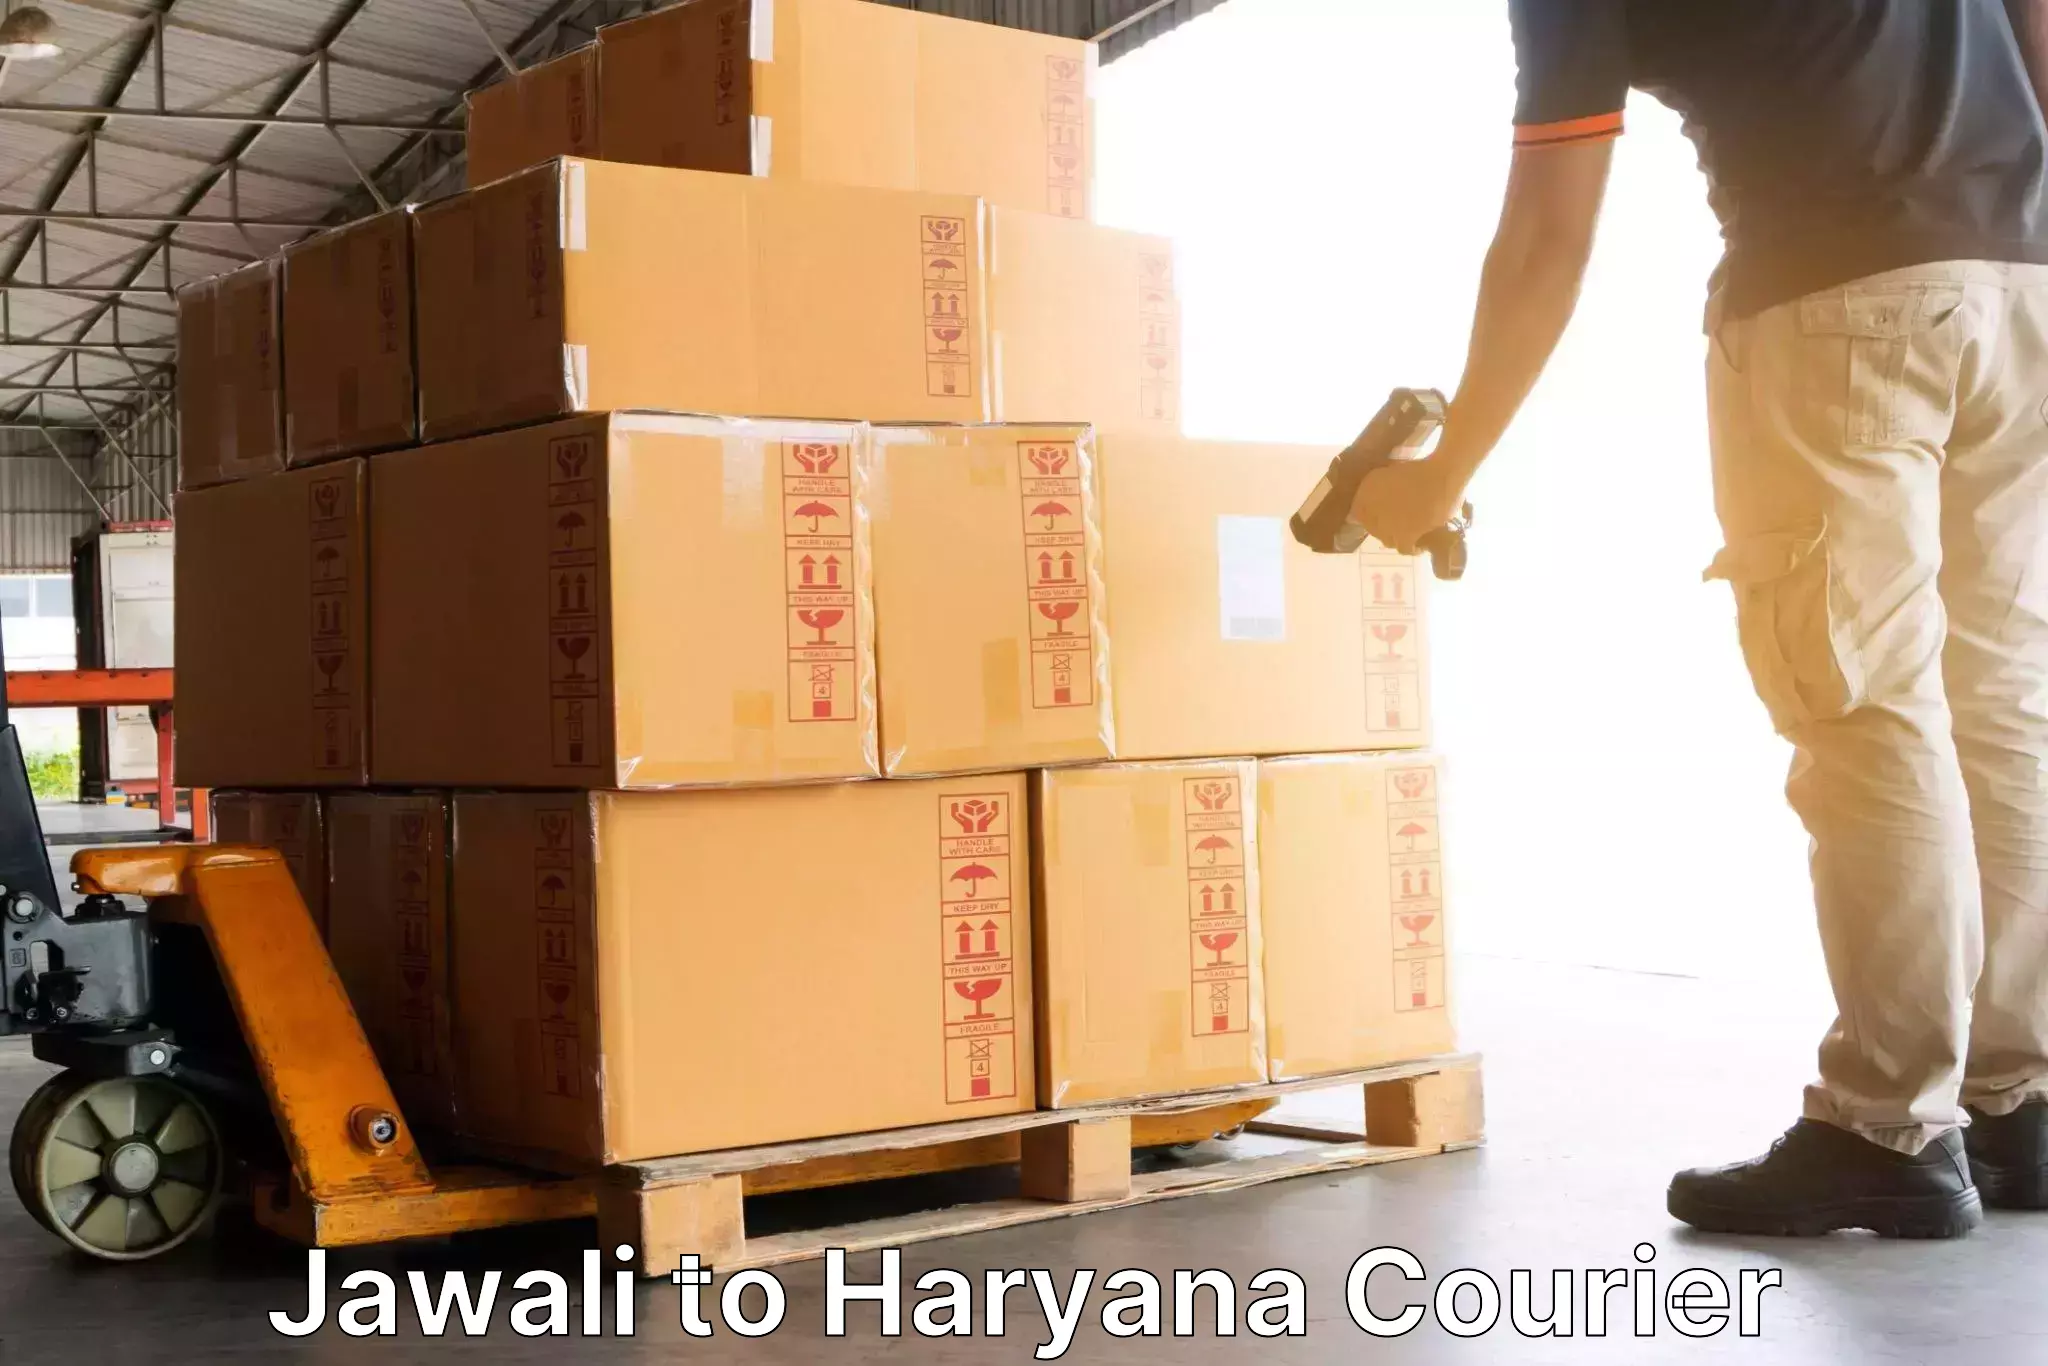 Personalized courier experiences Jawali to Gurugram